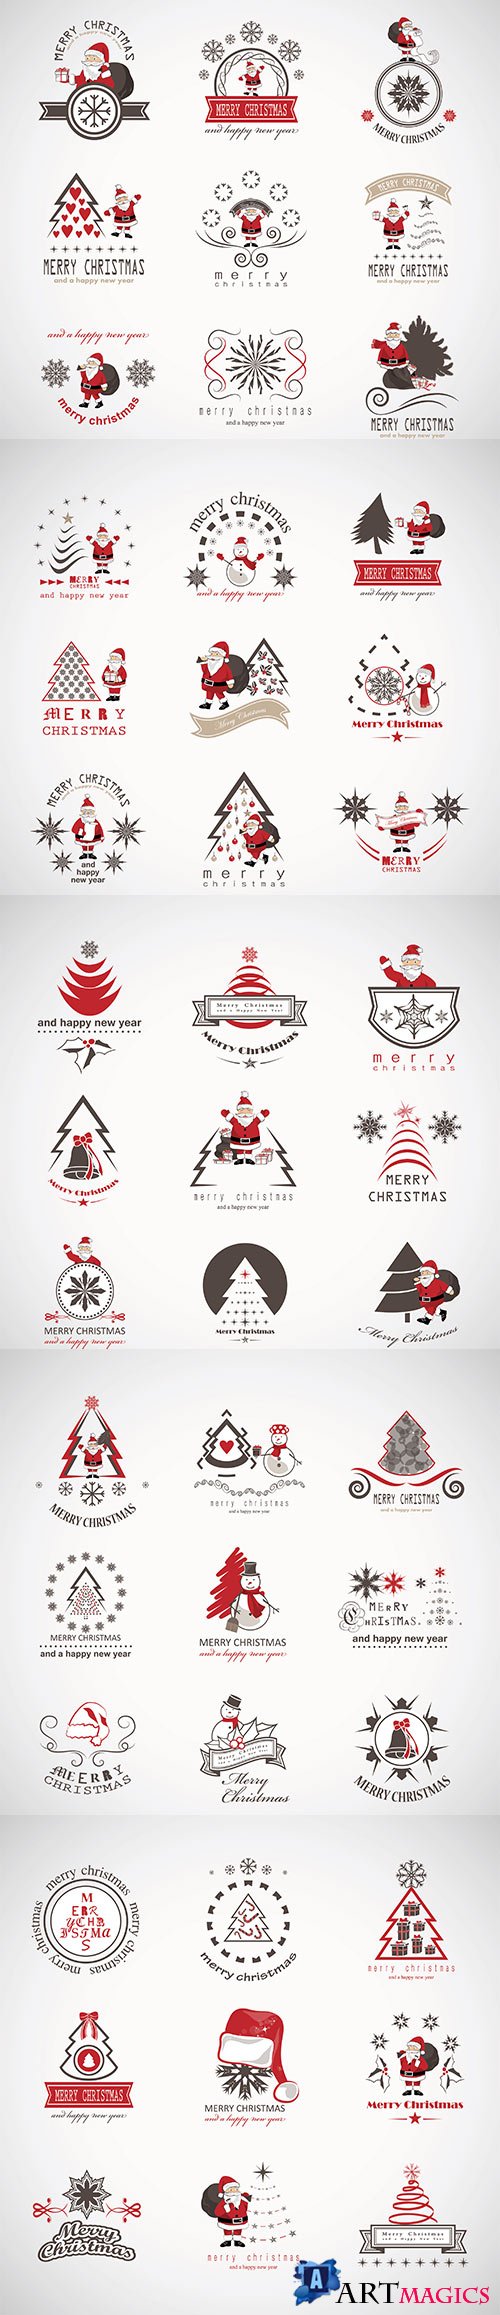 Christmas icons and elements set